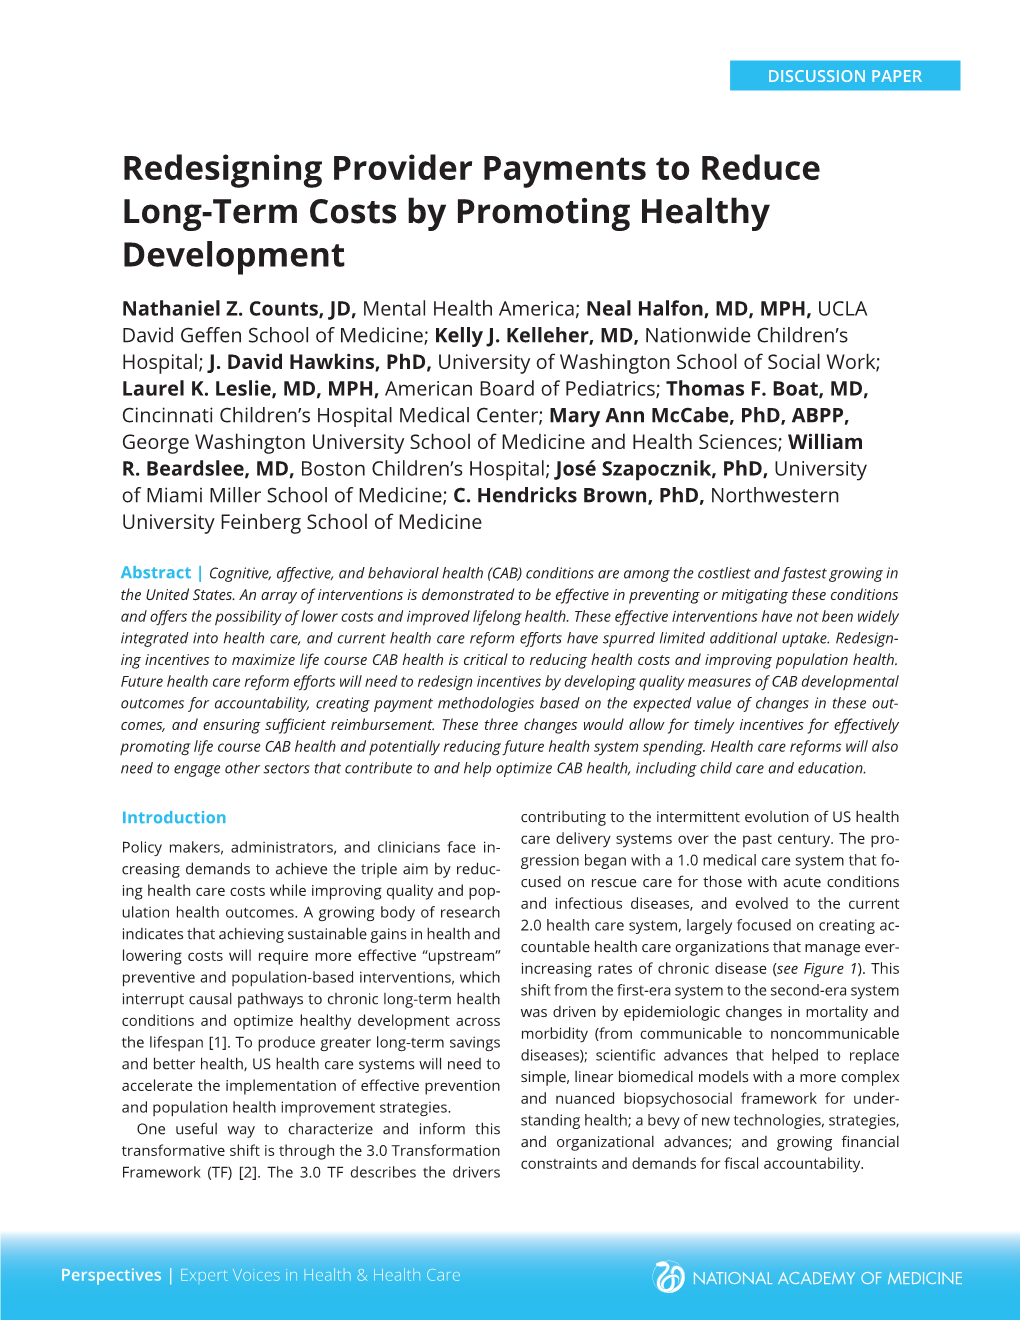 Redesigning Provider Payments to Reduce Long Term Cost Paper.Indd